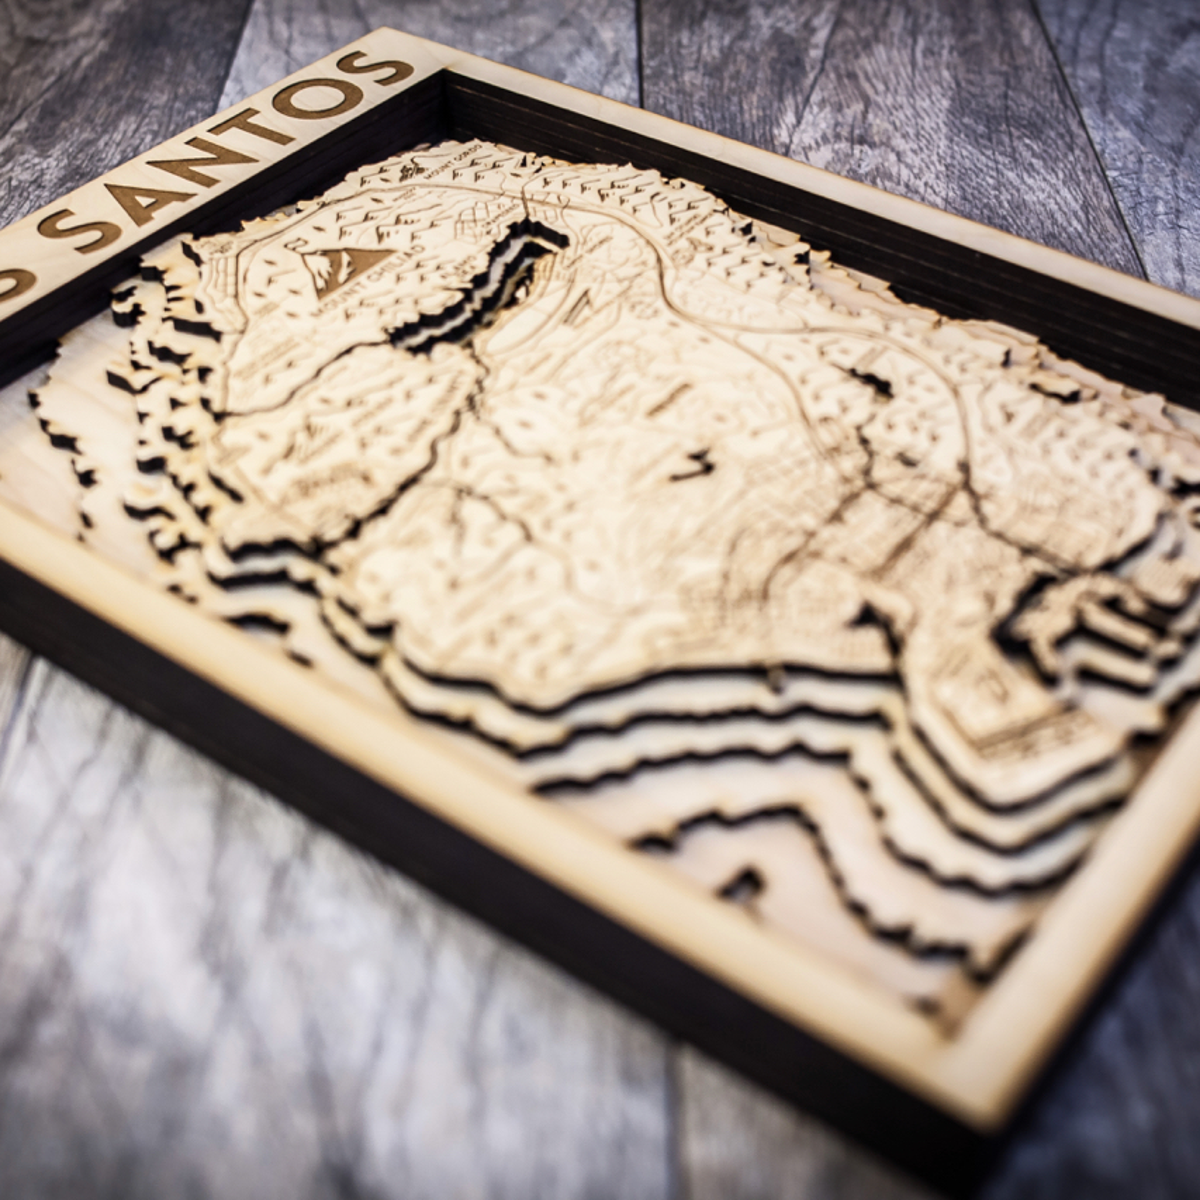 This map of GTA 5's Los Santos carved in wood is perfect